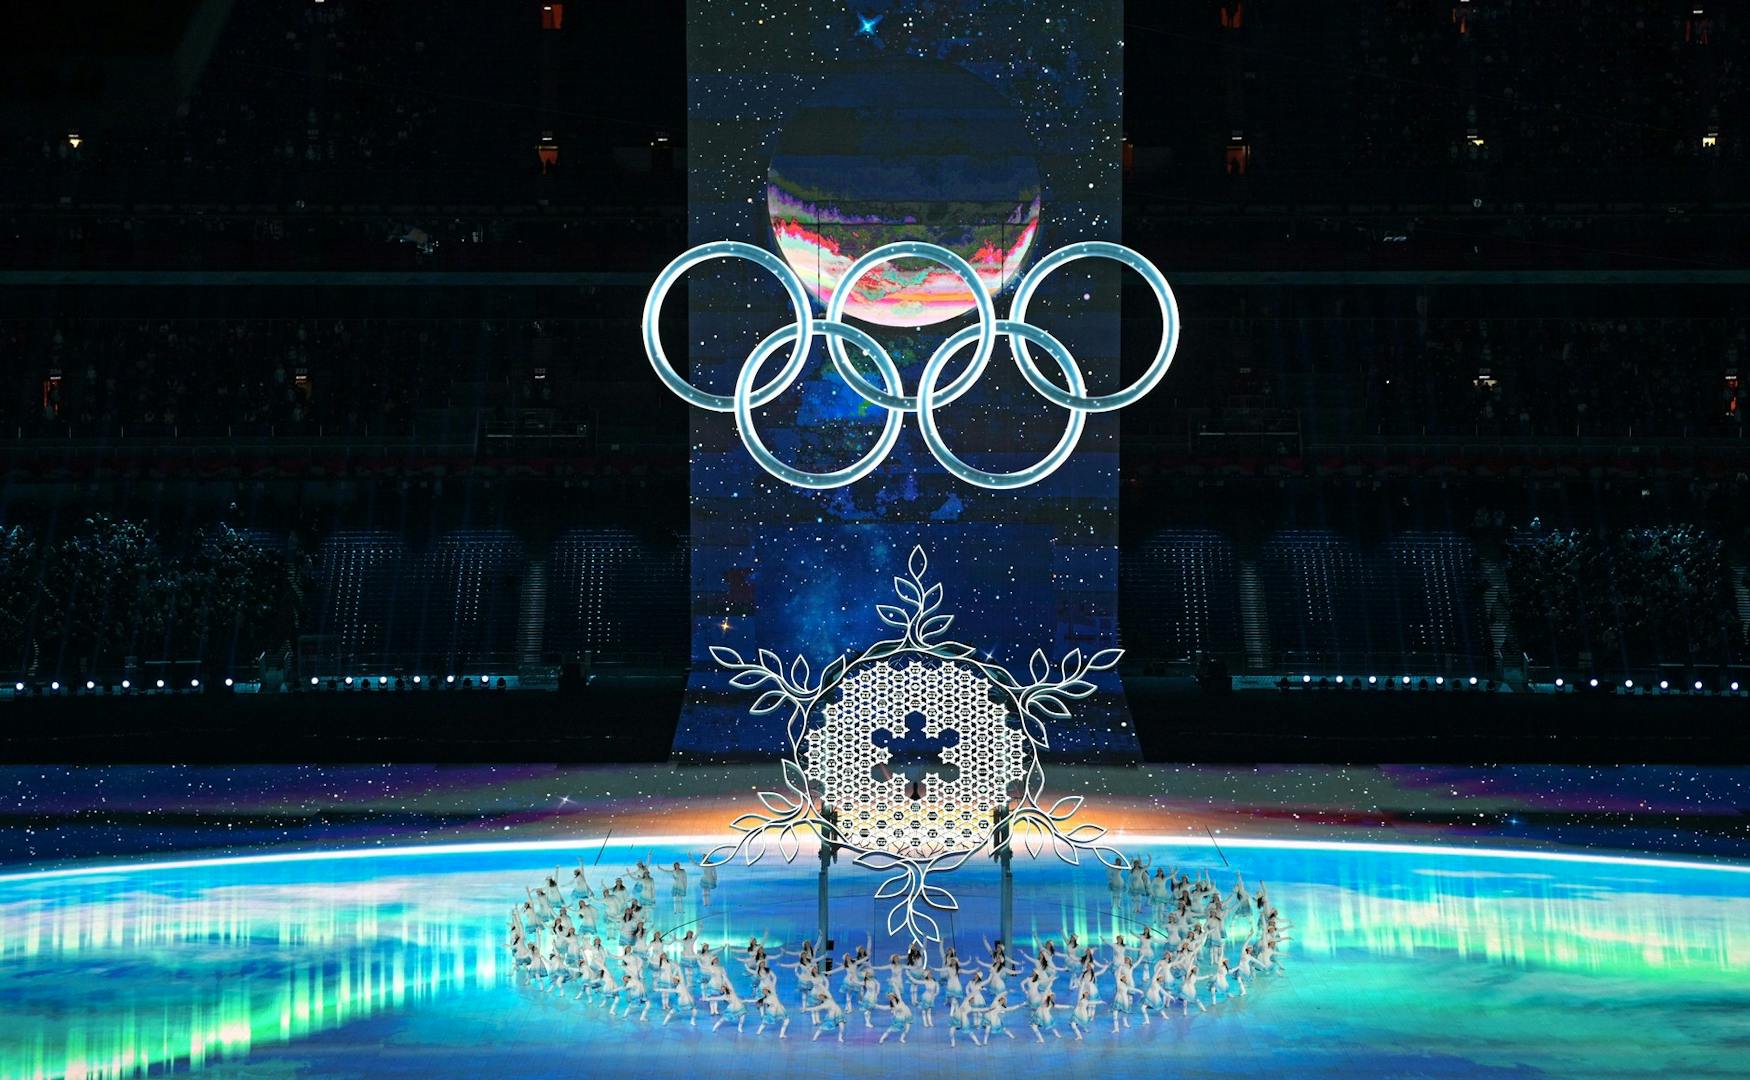 Putin_attended_the_opening_ceremony_of_2022_Beijing_Winter_Olympics_(2).jpg